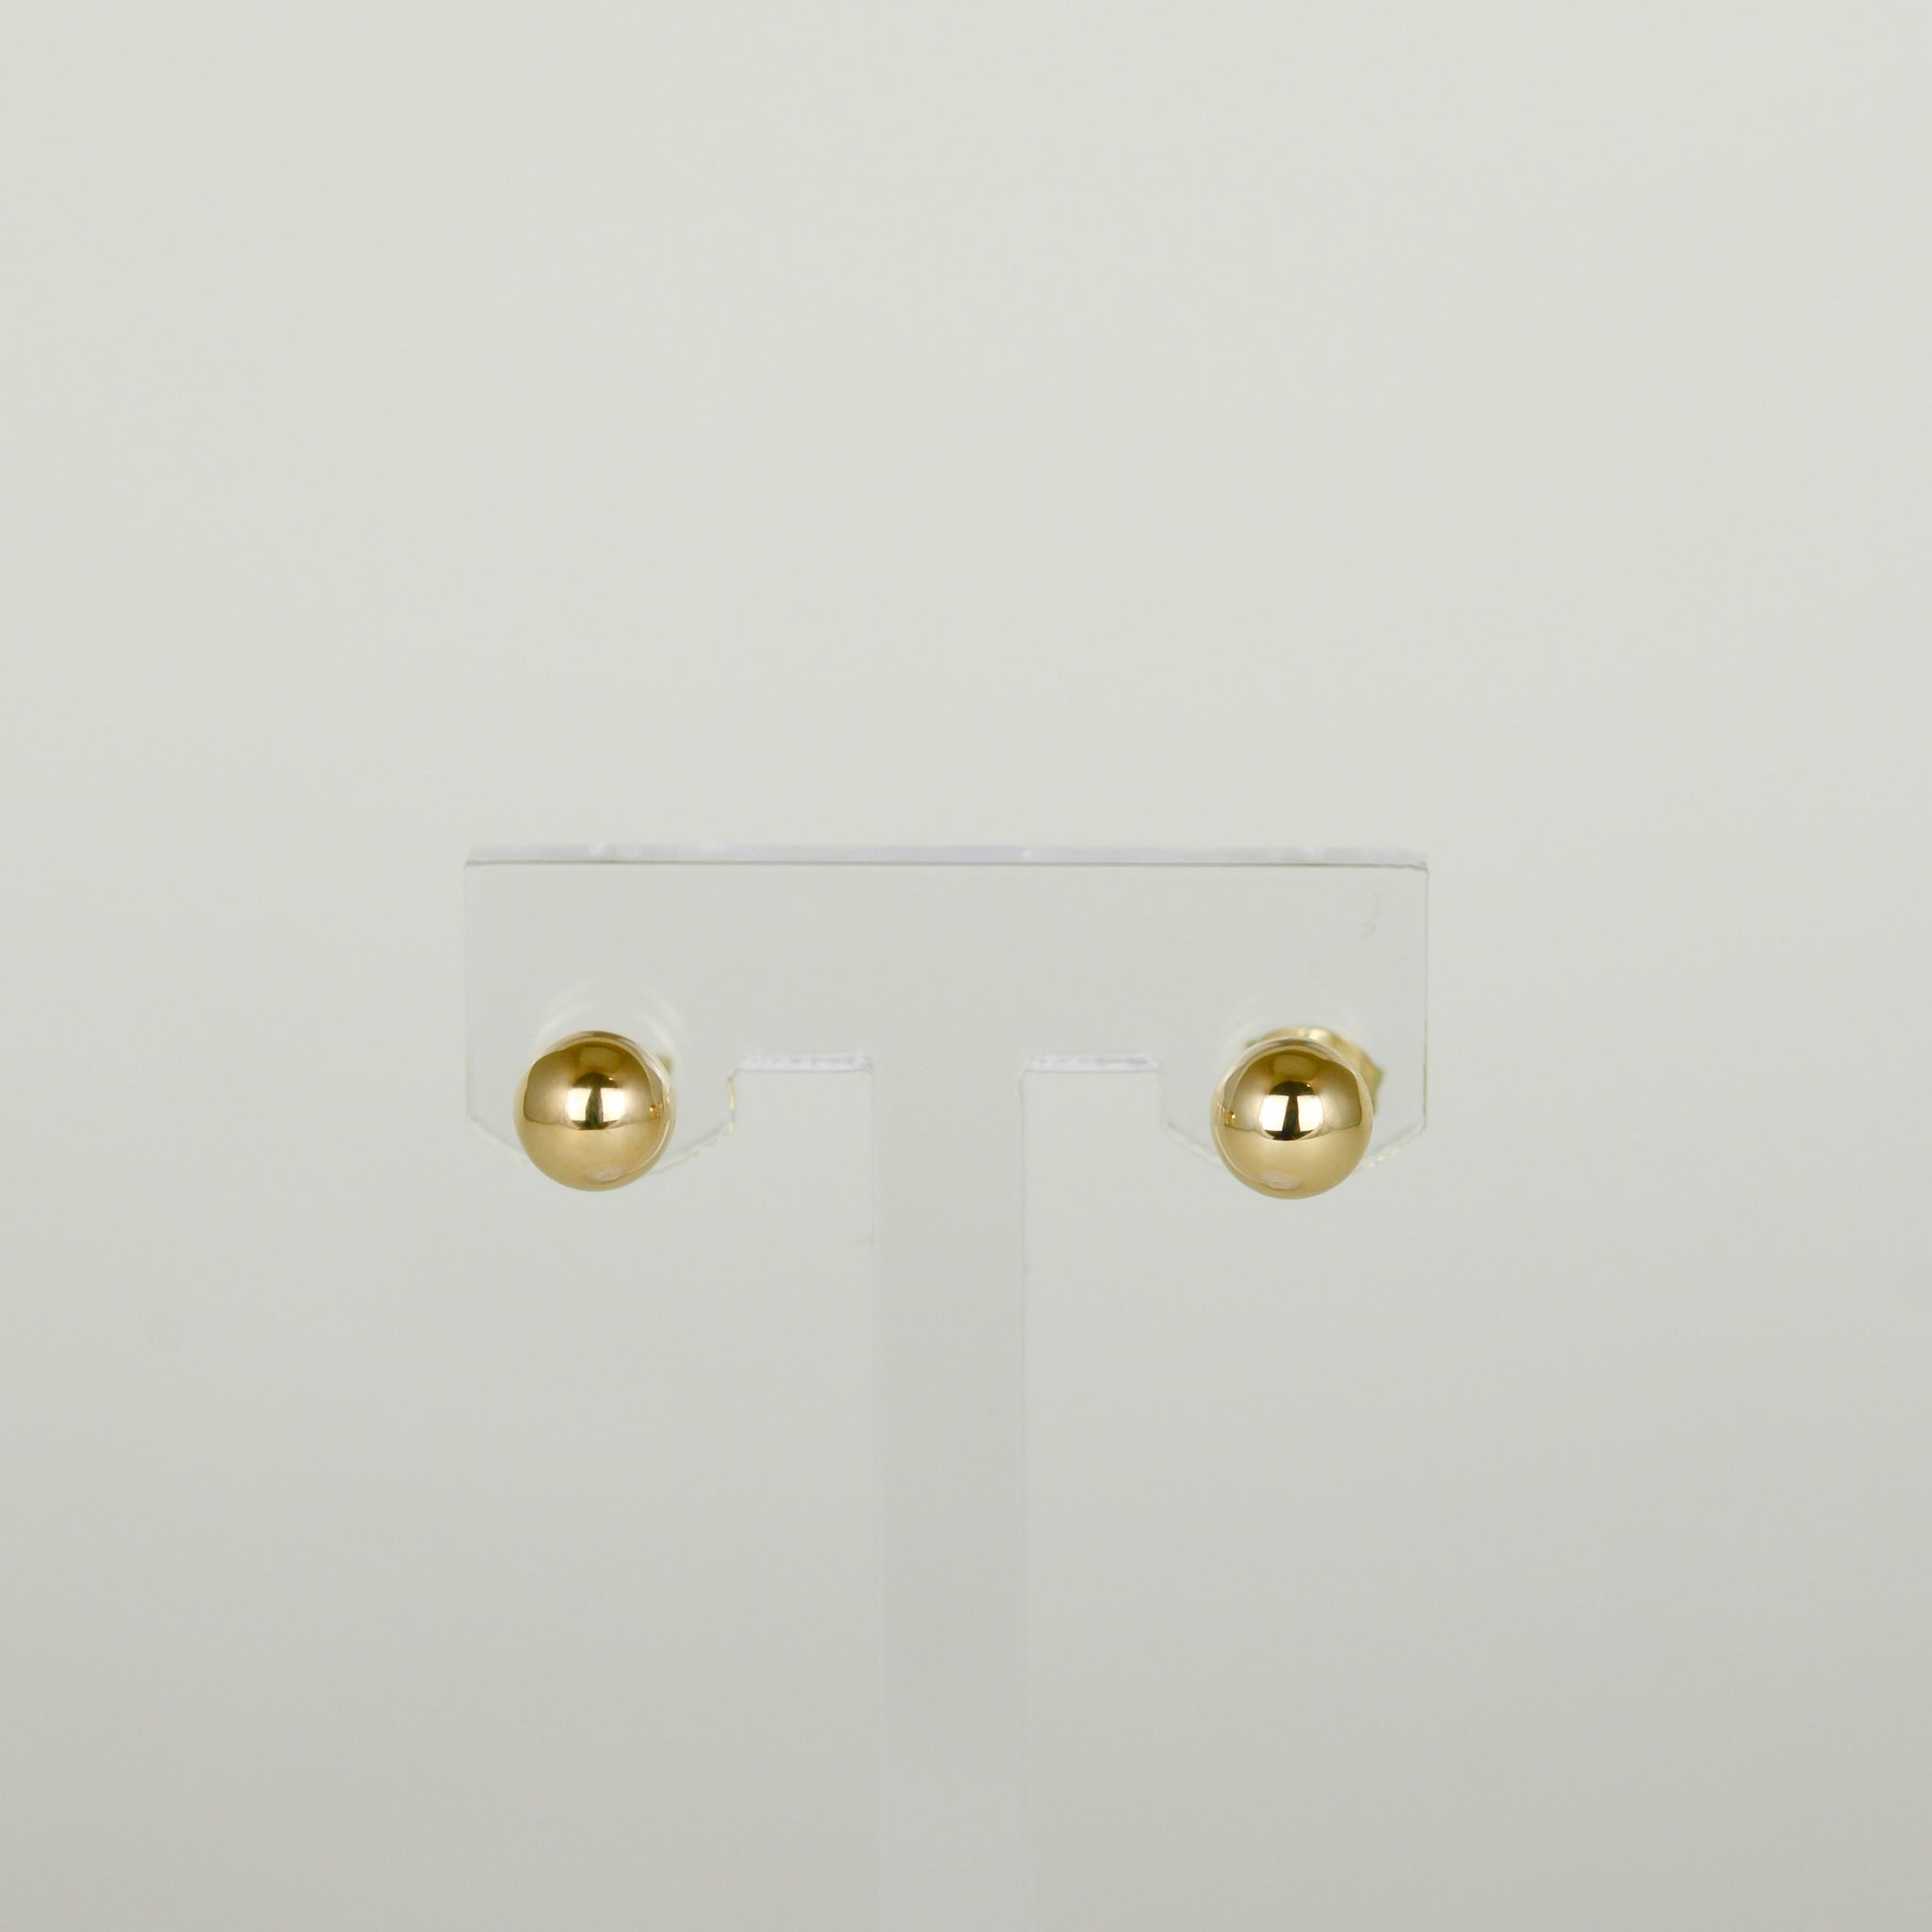 9ct Yellow Gold 6mm Hollow Ball Stud Earrings